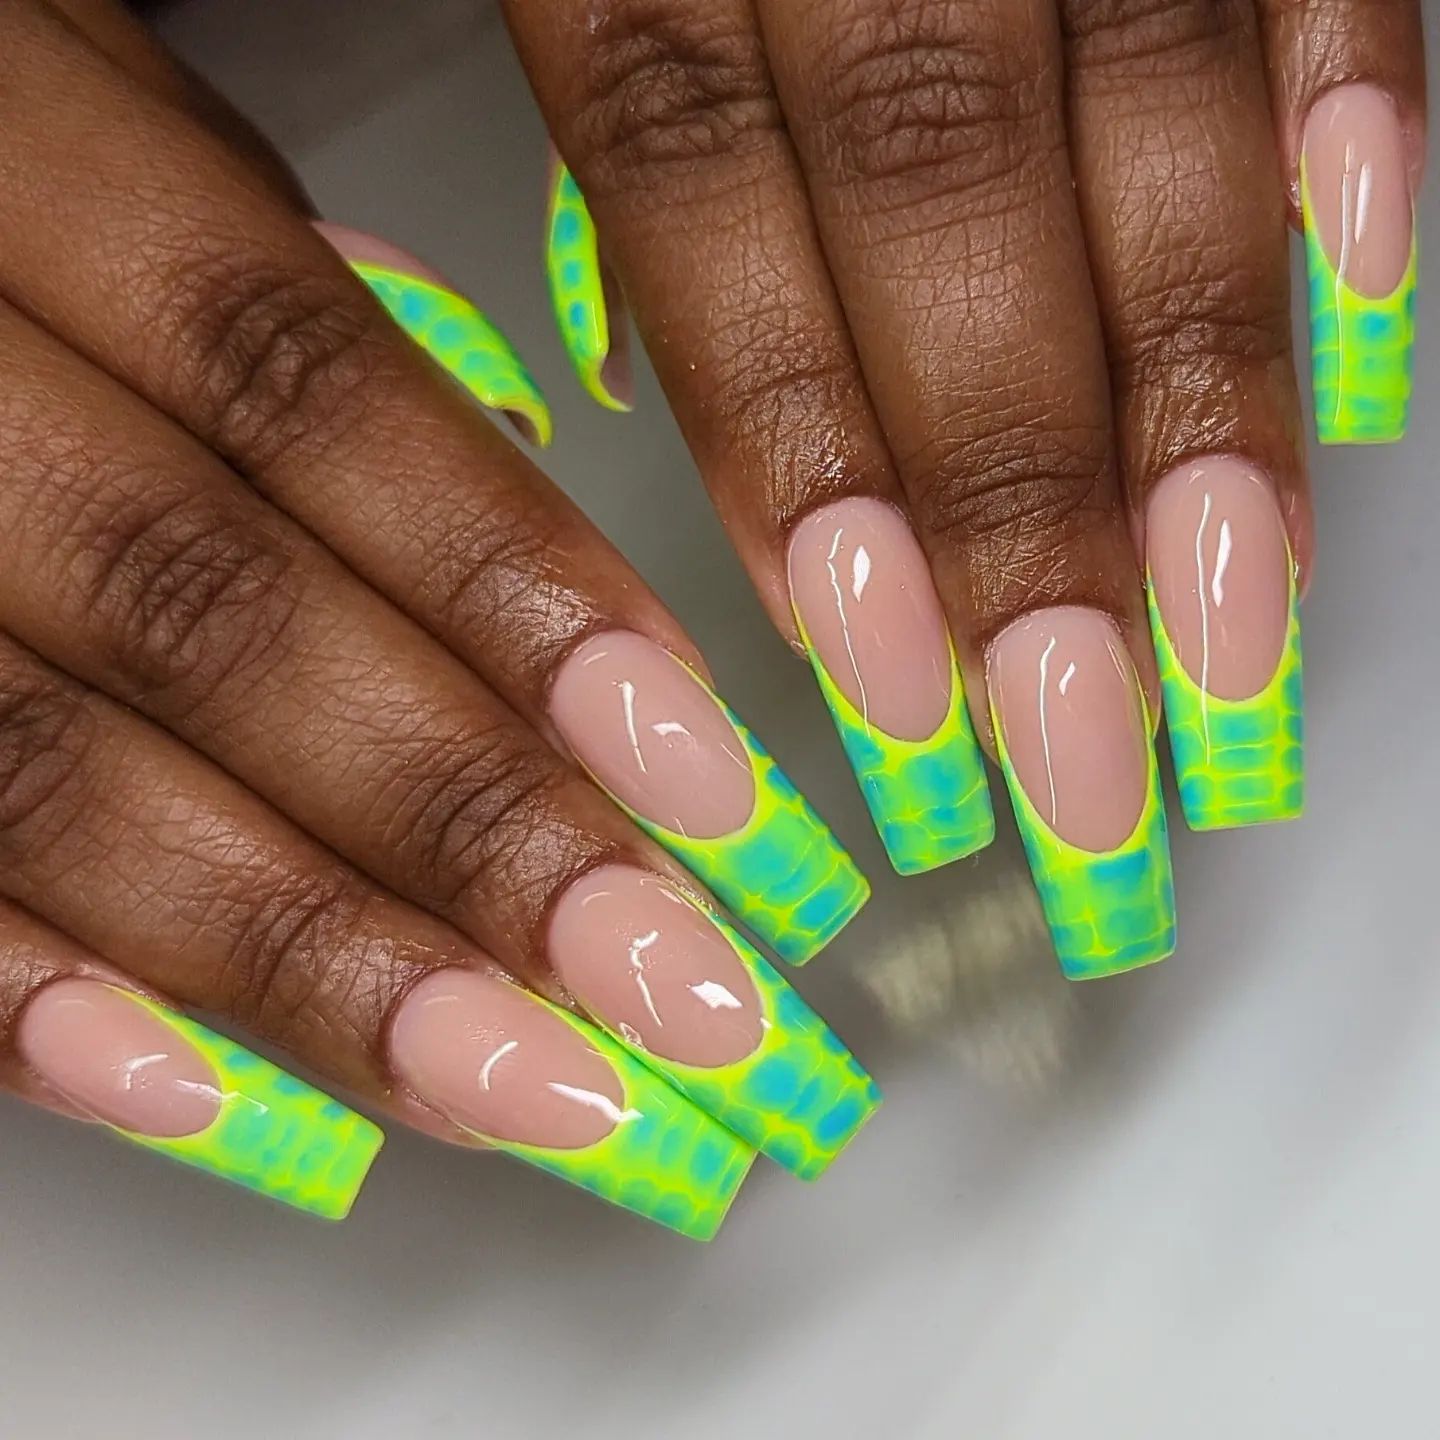  French mani is one of the best manicures and we all know that. To make it distinctive, neon green nail polish can be used for your French tips.